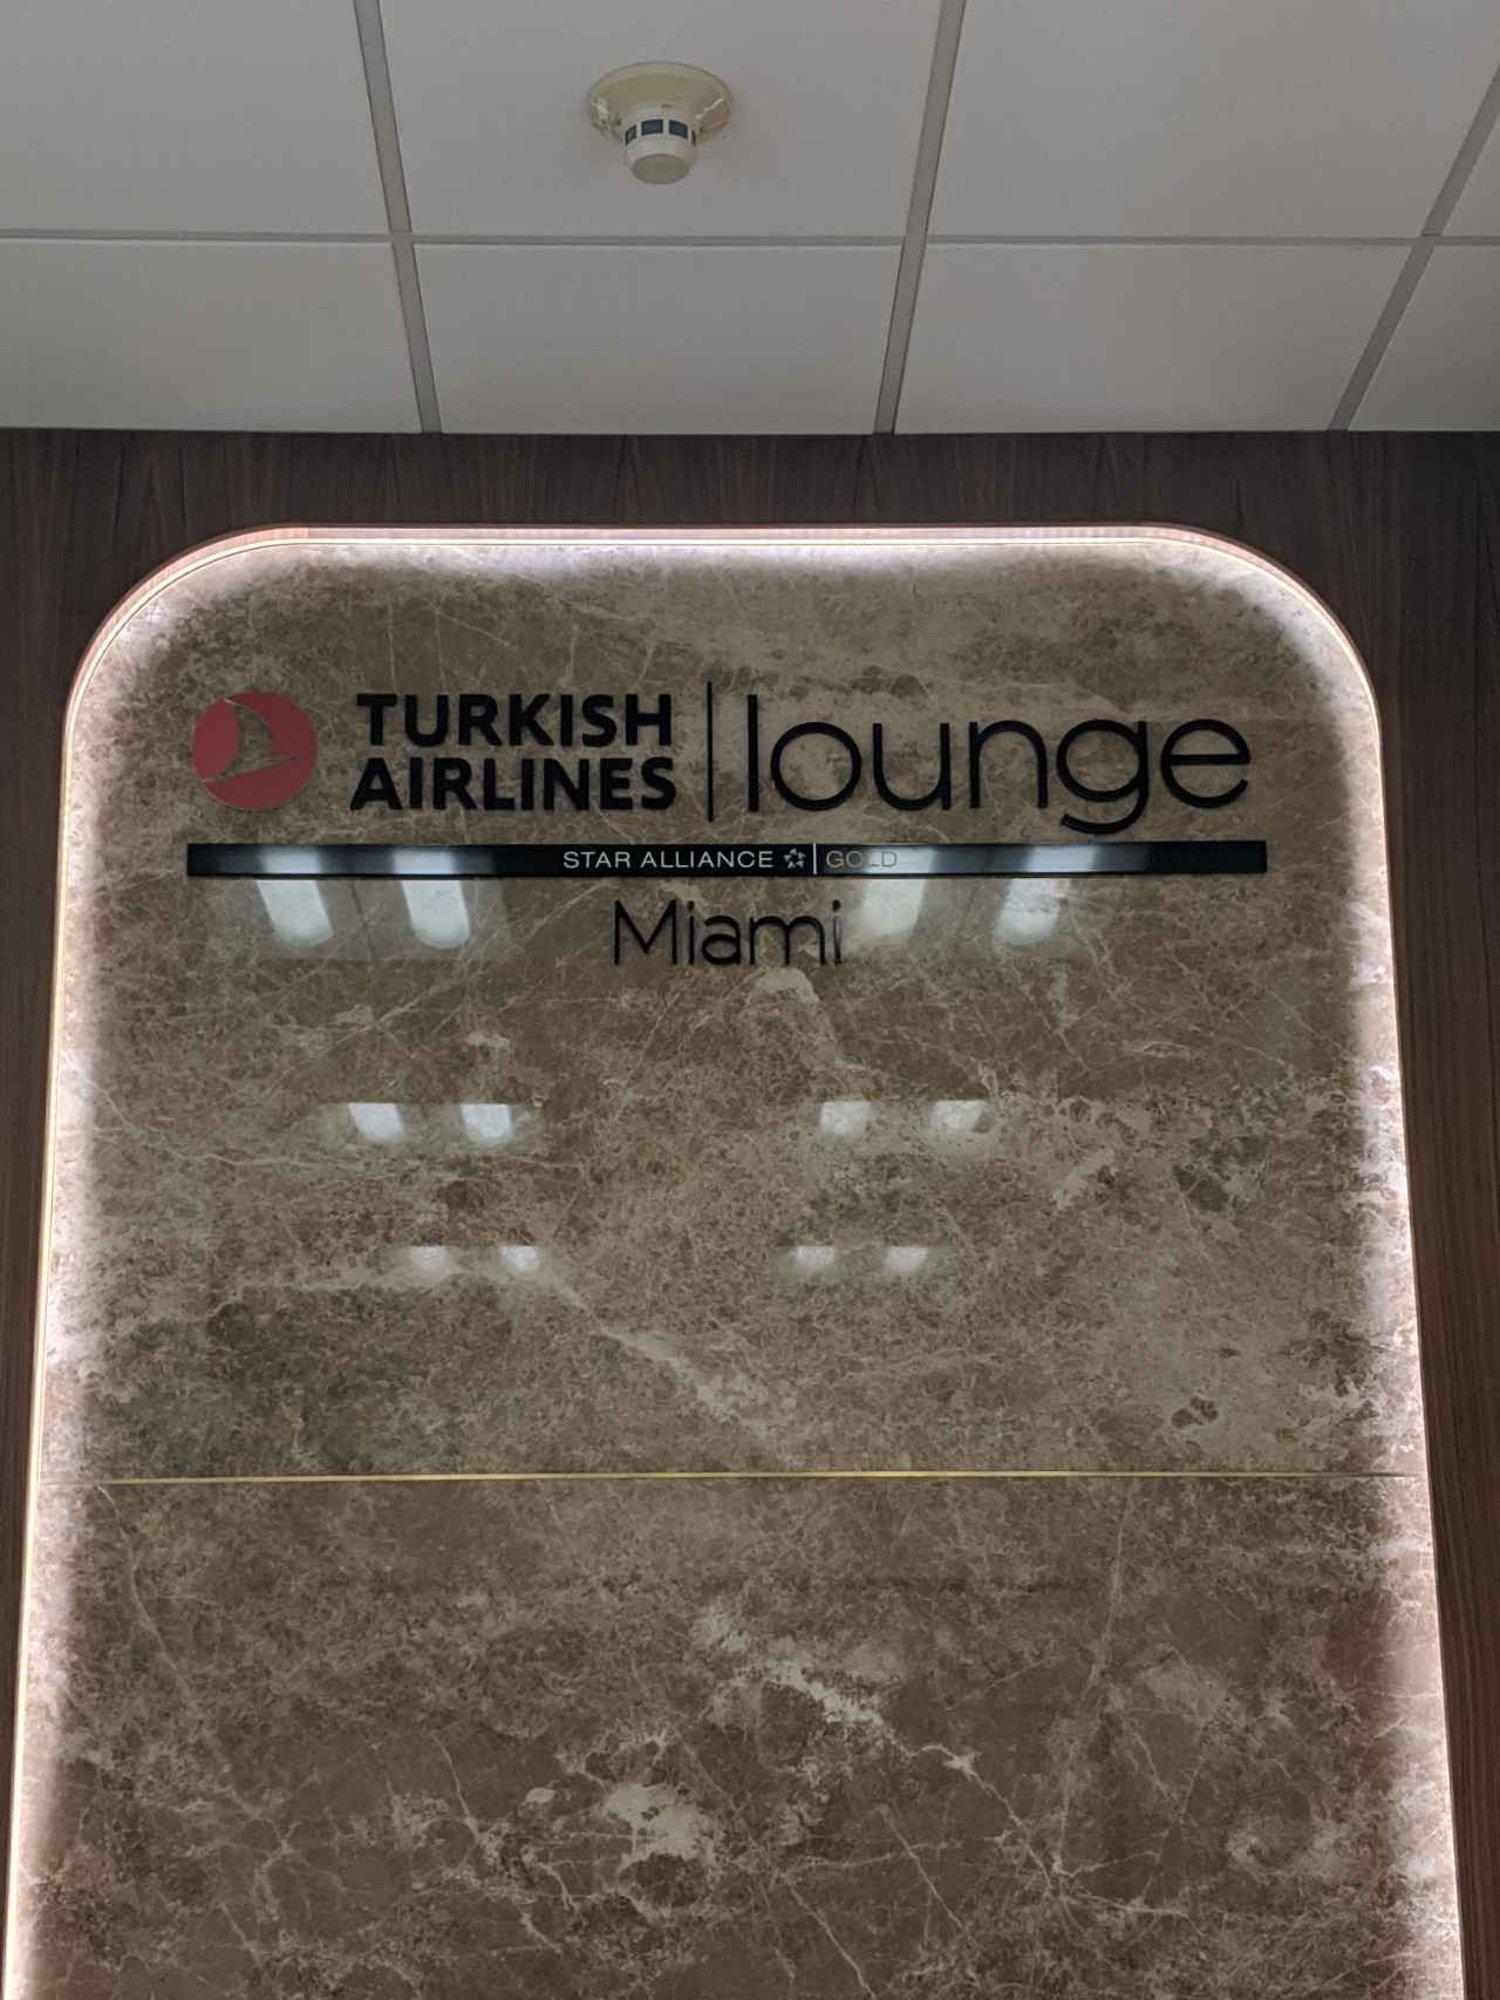 Turkish Airlines Lounge Miami image 5 of 7